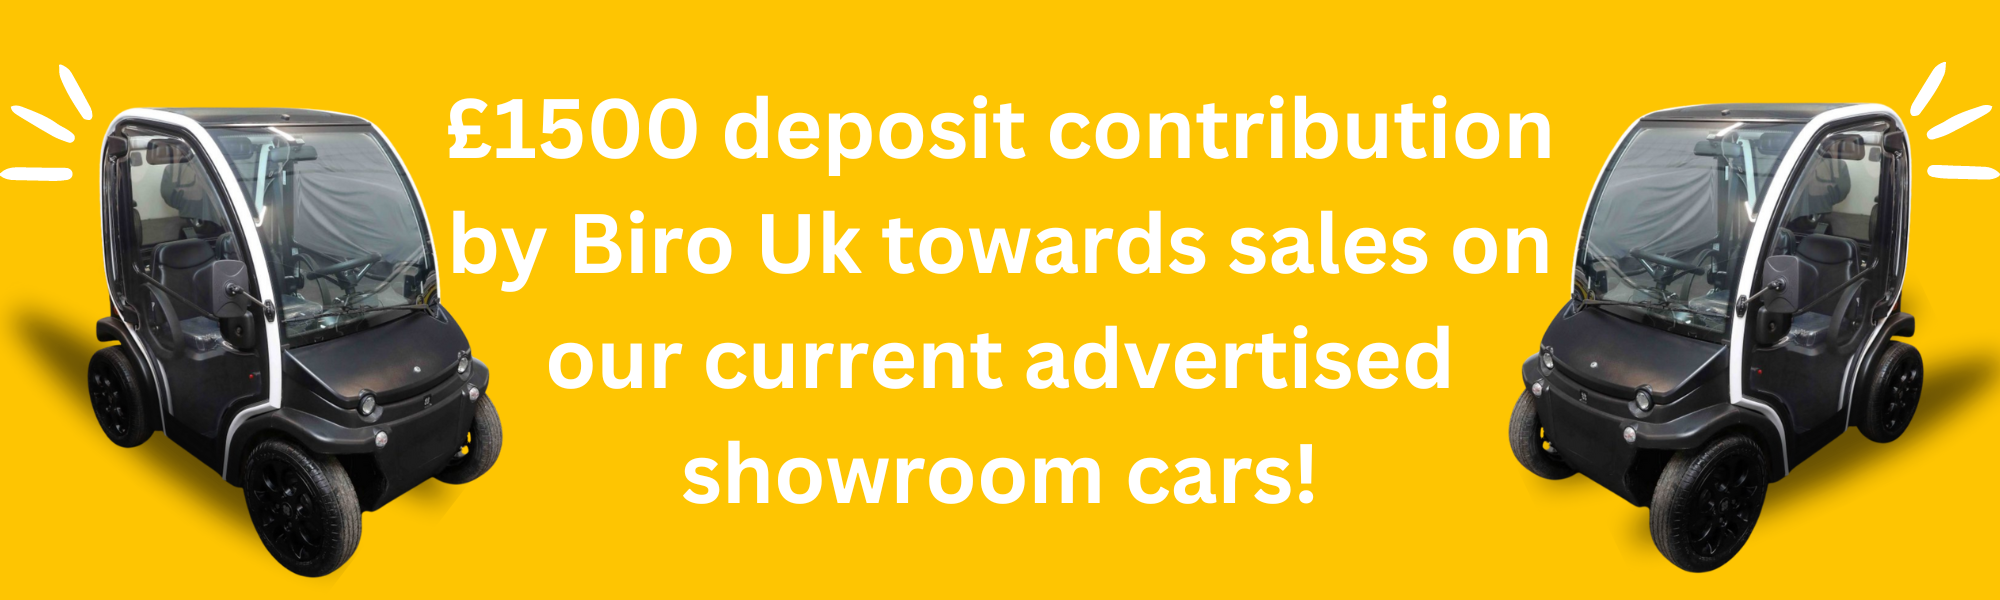 £1500 deposit contribution by Biro Uk towards sales on our current advertised showroom cars!